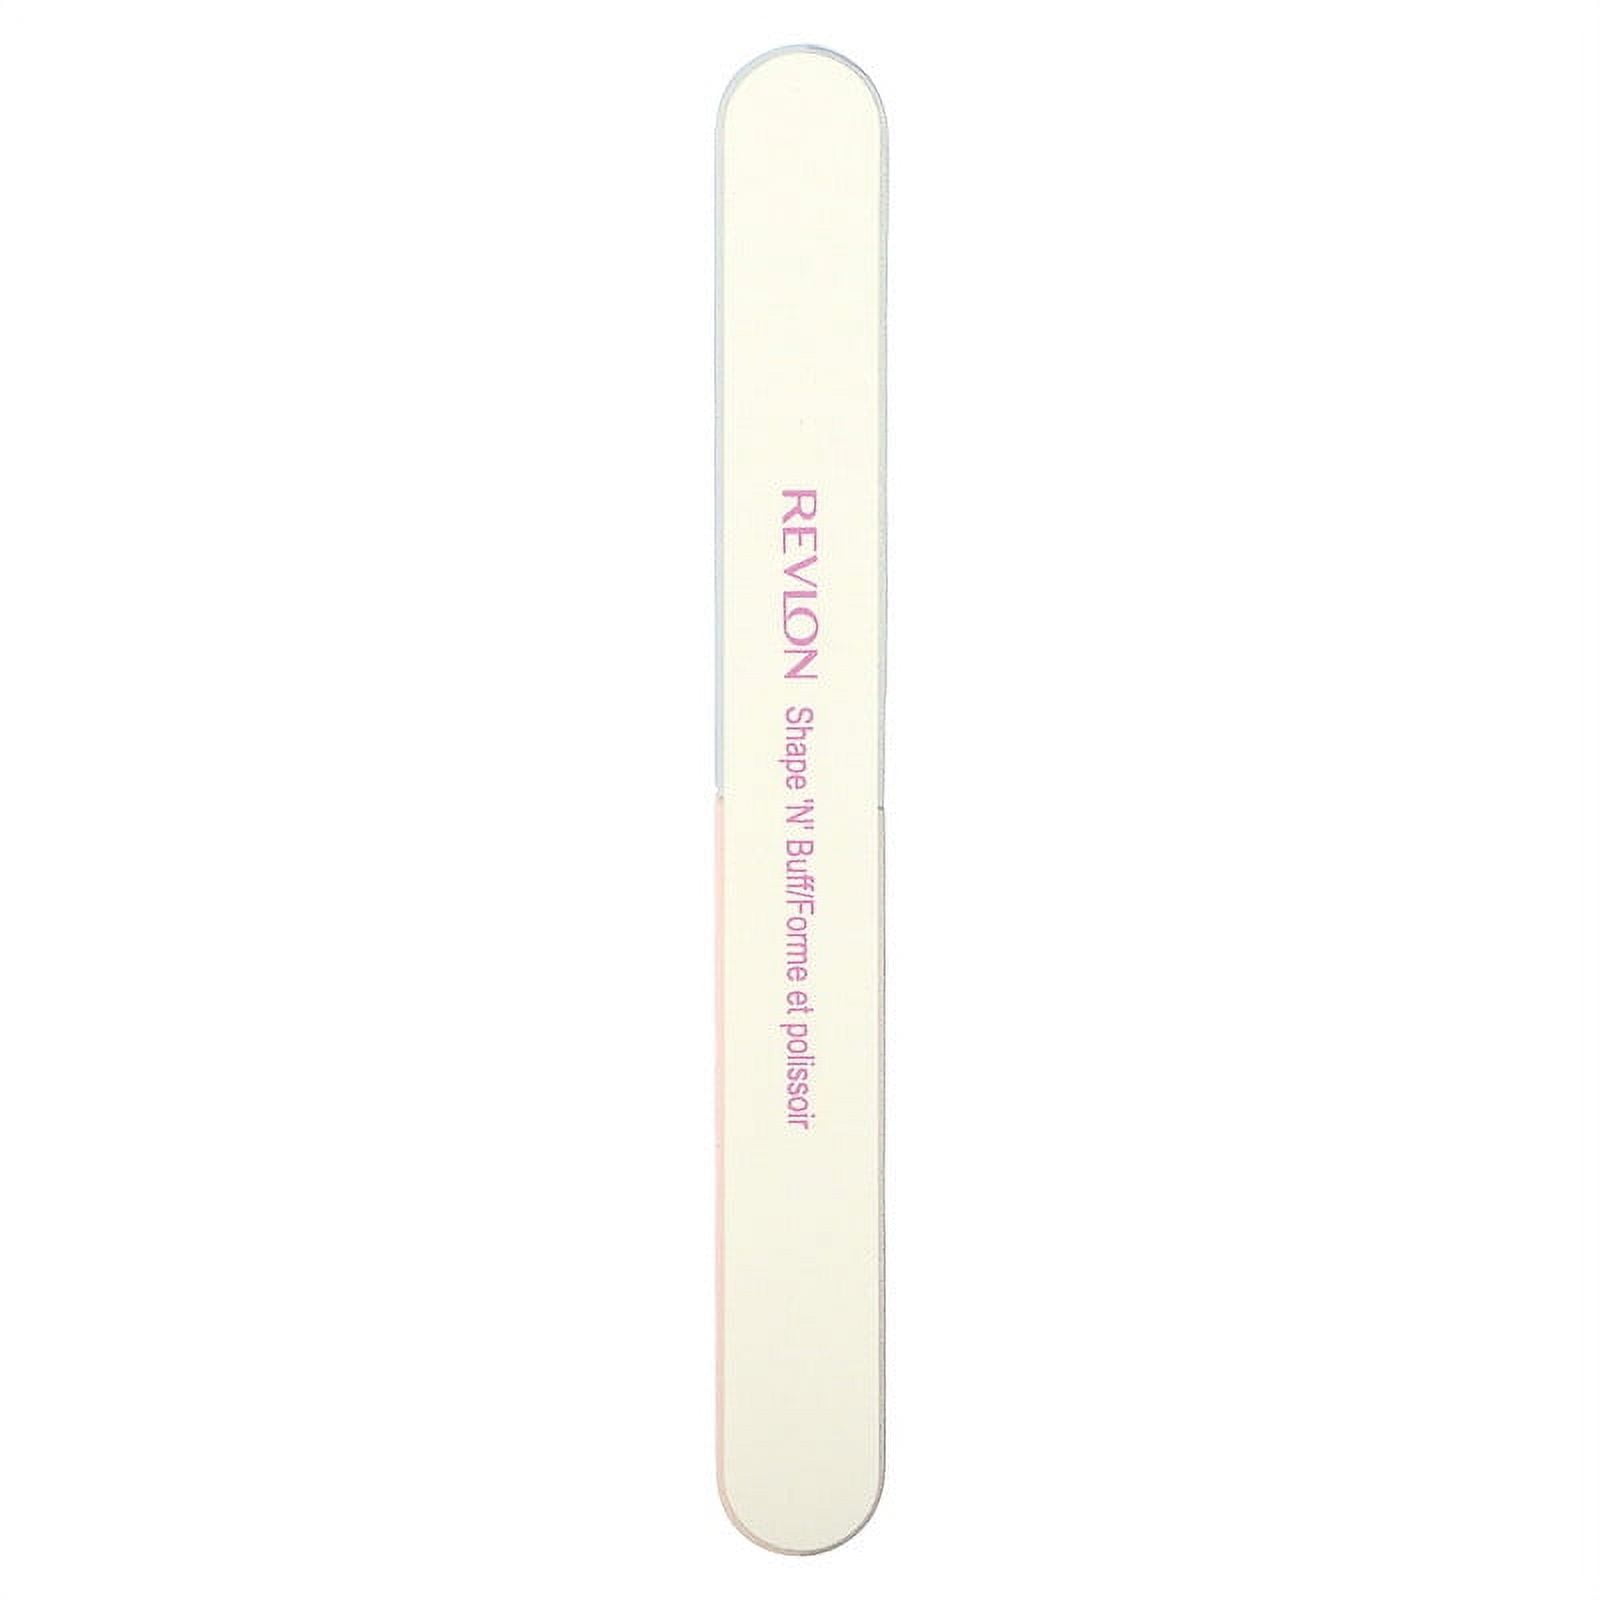  Revlon Nail Buffer, Shape 'N' Buff Nail File & Buffer, Nail  Care Tool, All-in-One Shaping & Buffing, Easy to Use (Pack of 1) : Nail  Files And Buffers : Beauty